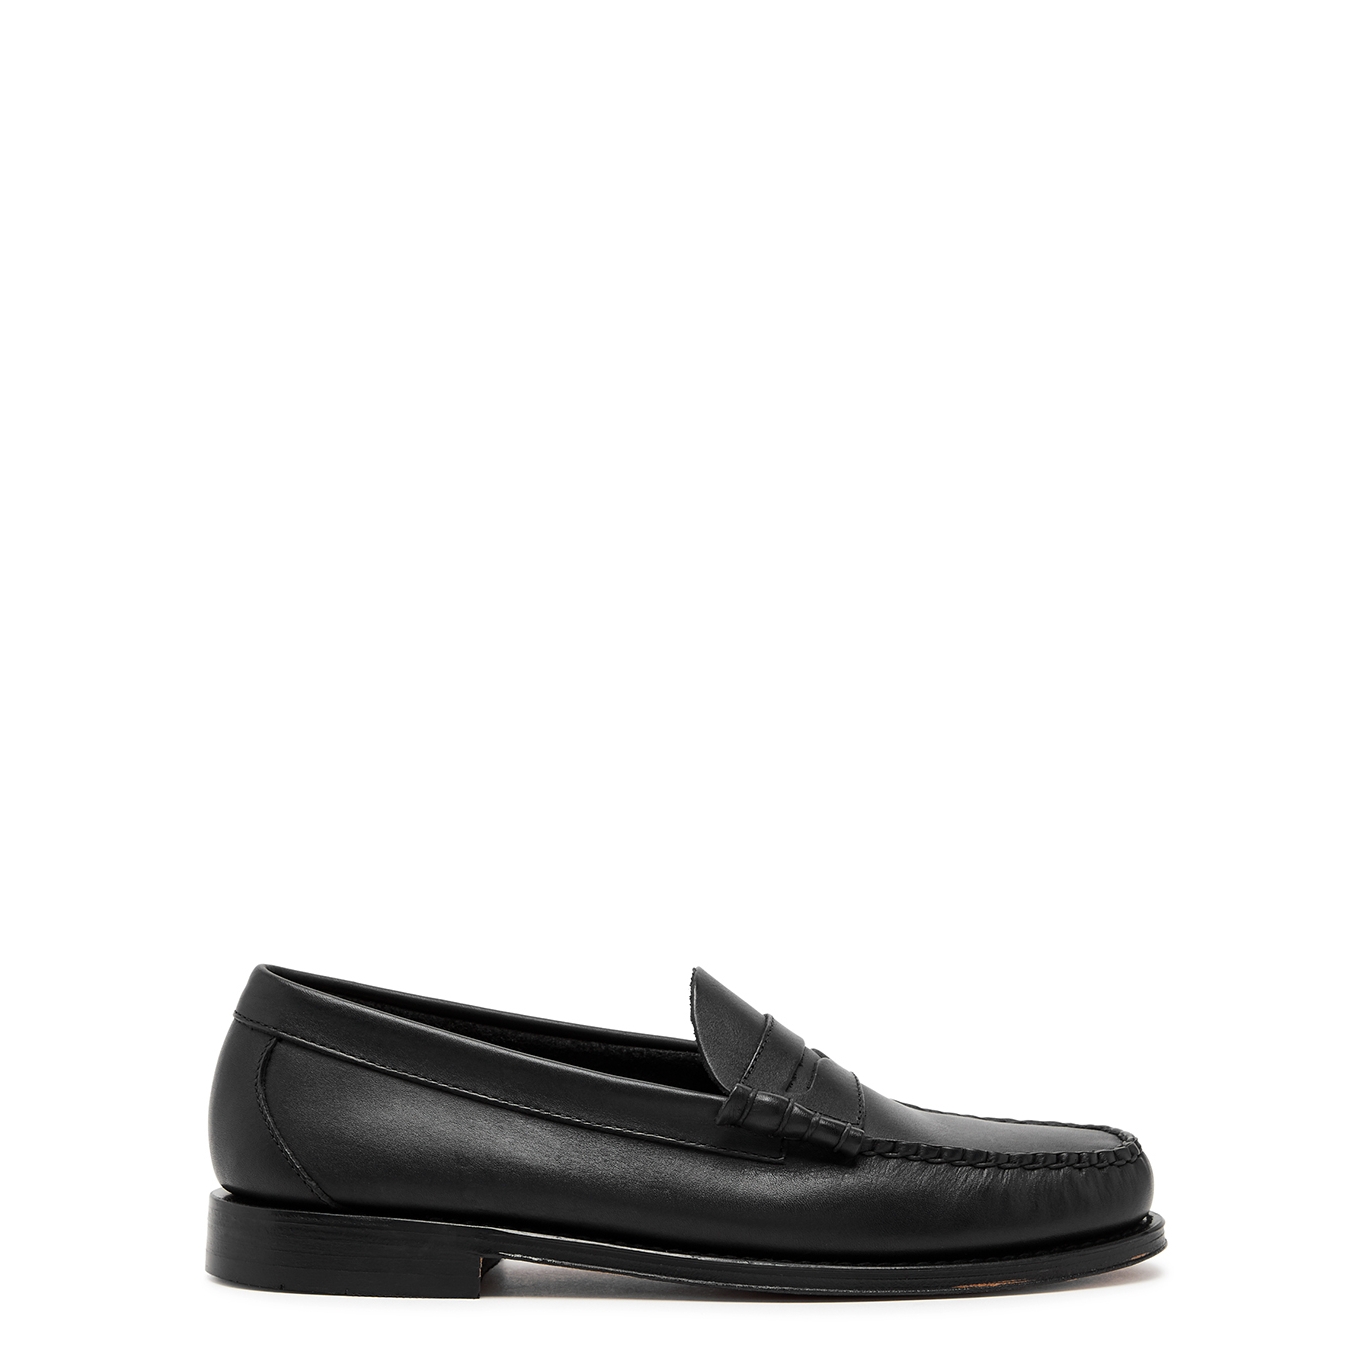 G.H Bass & Co Weejun Heritage Larson Leather Loafers - Black - 8